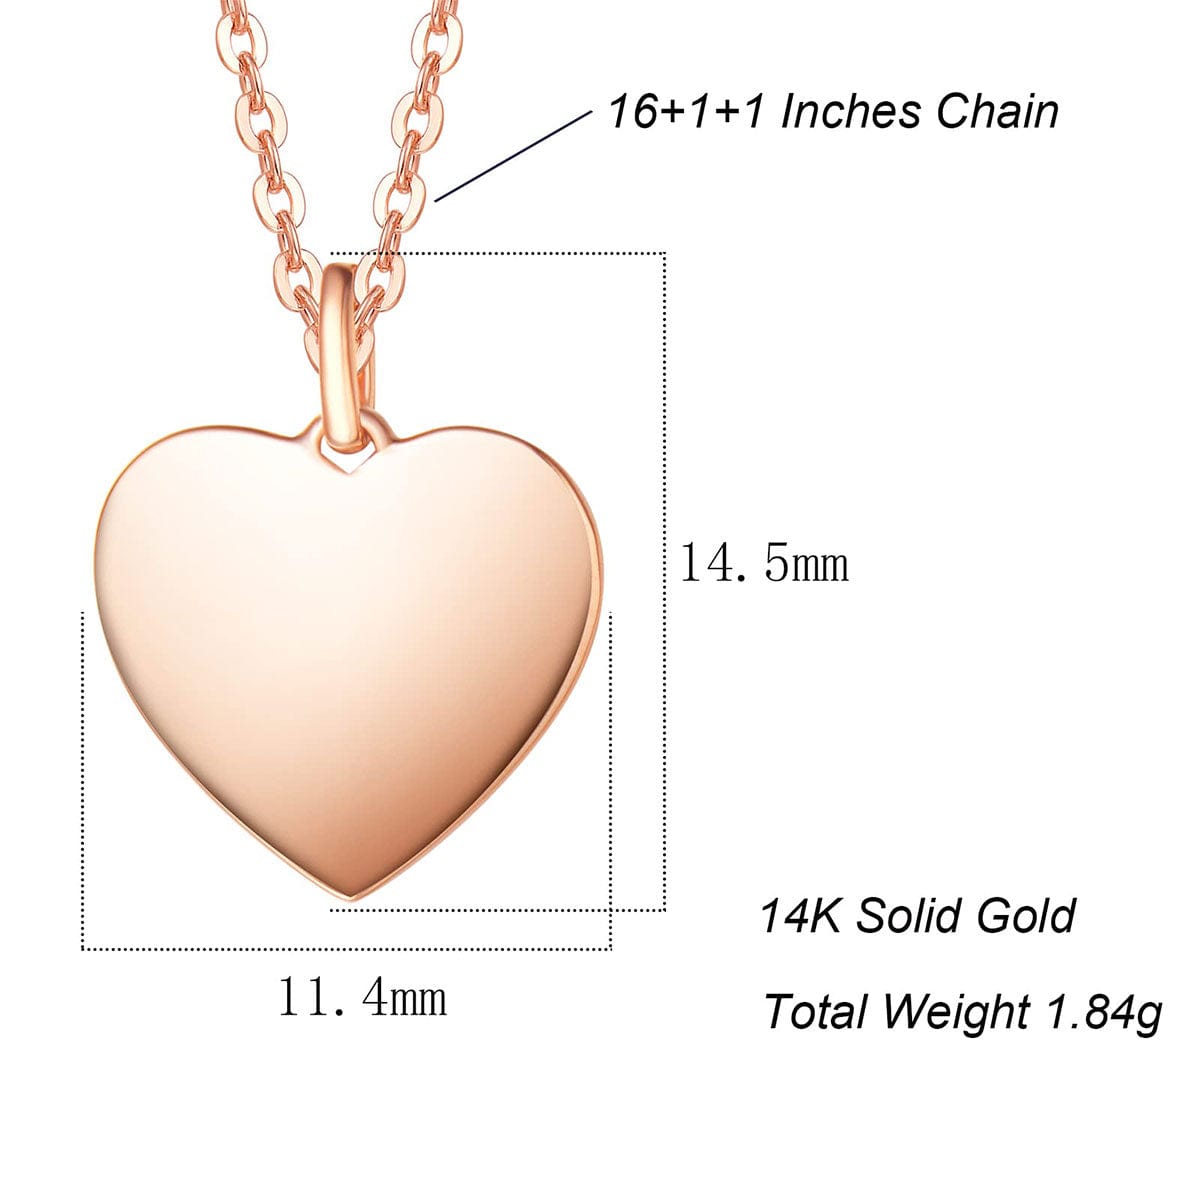 Dainty heart pendant size and length